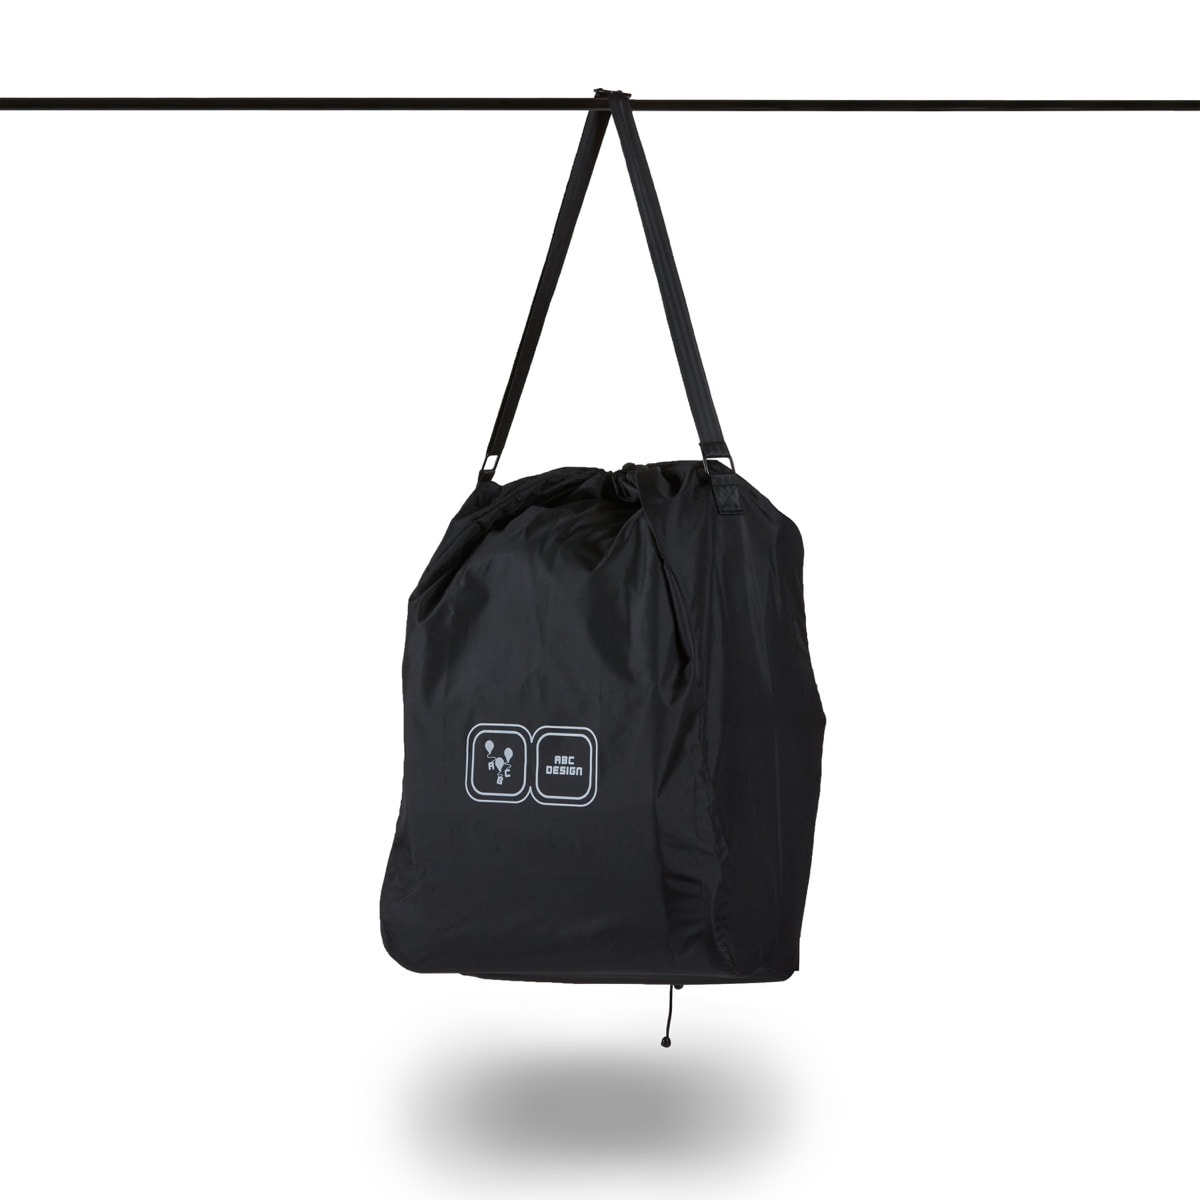 Buggy ABC DESIGN  Ping Two Trekking (Ink)